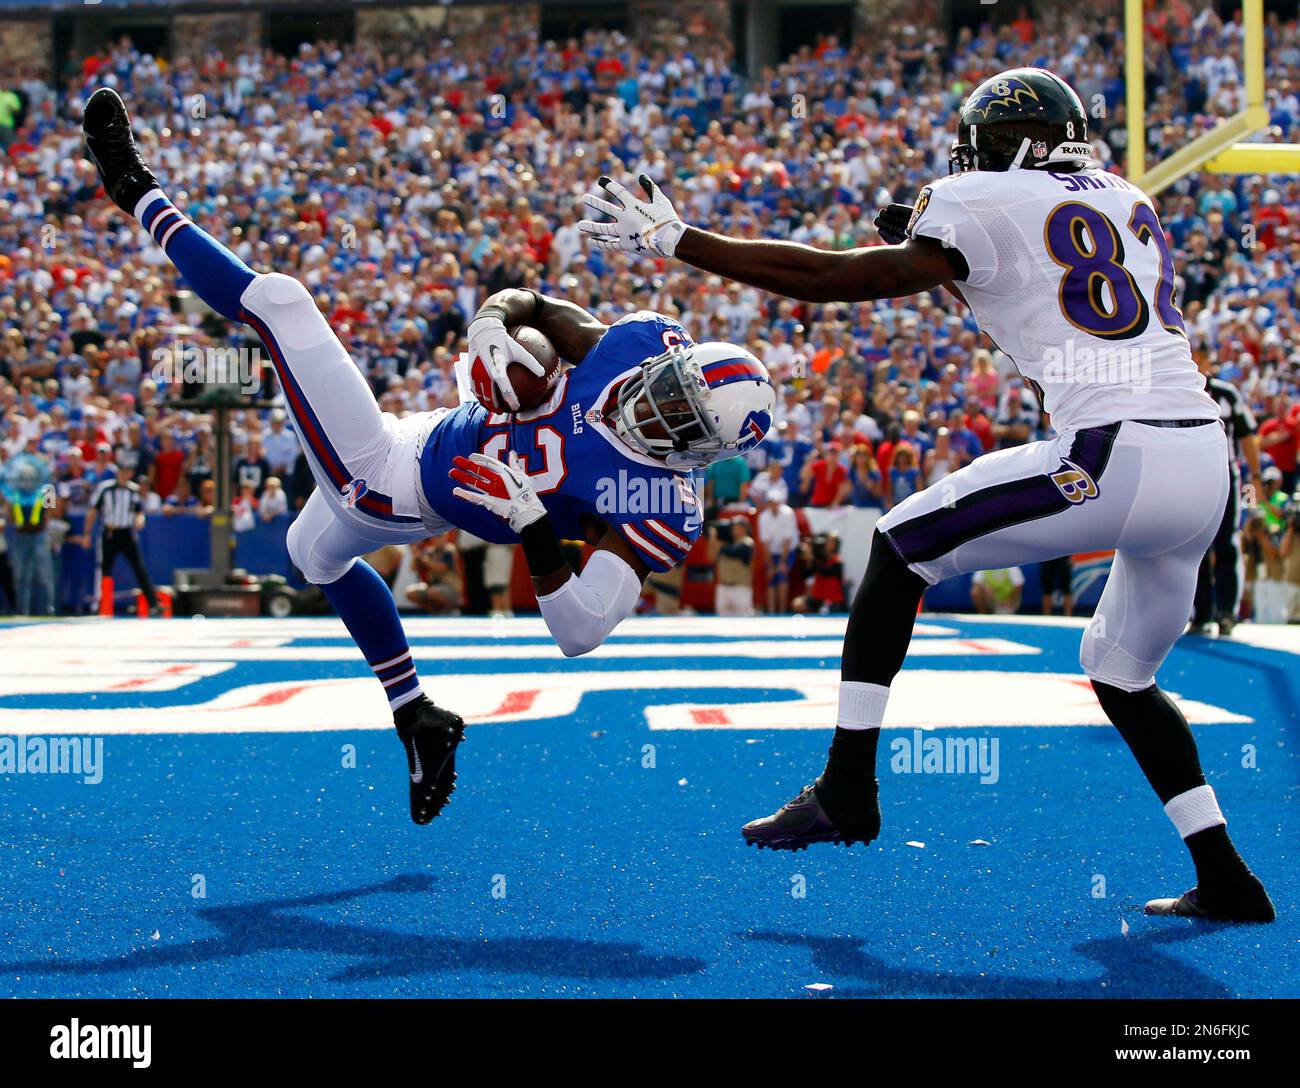 AP10ThingsToSee - Buffalo Bills free safety Aaron Williams (23) intercepts  a pass intended for Baltimore Ravens wide receiver Torrey Smith (82) during  the second half of an NFL football game on Sunday,